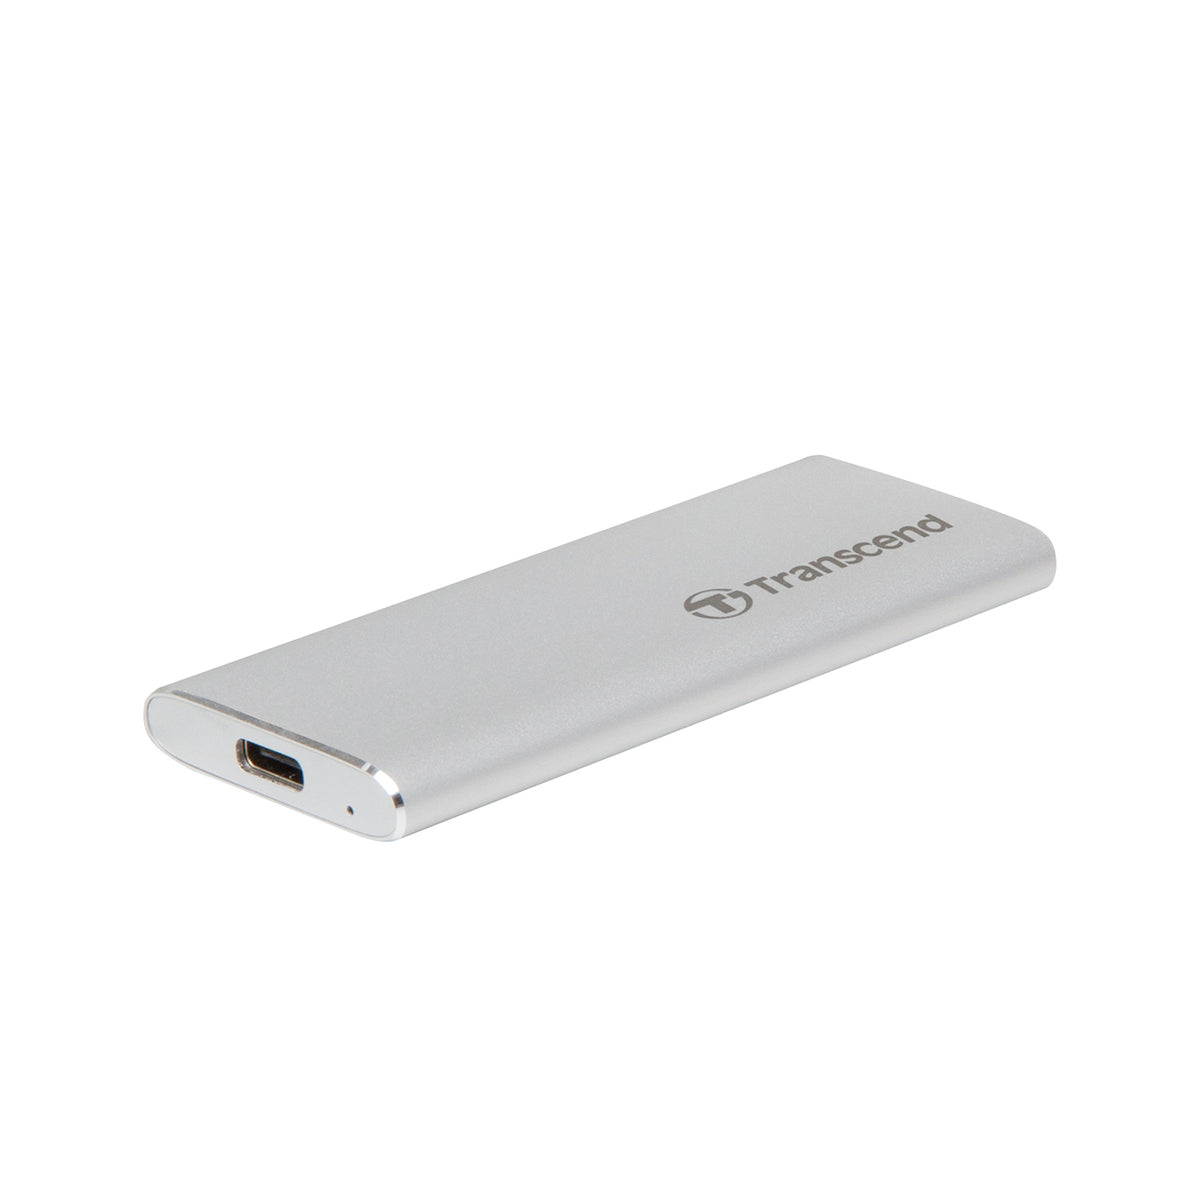 Transcend ESD260C Ultra Lightweight Portable SSD with USB 3.1 Gen 2 Interface & Type-C Port